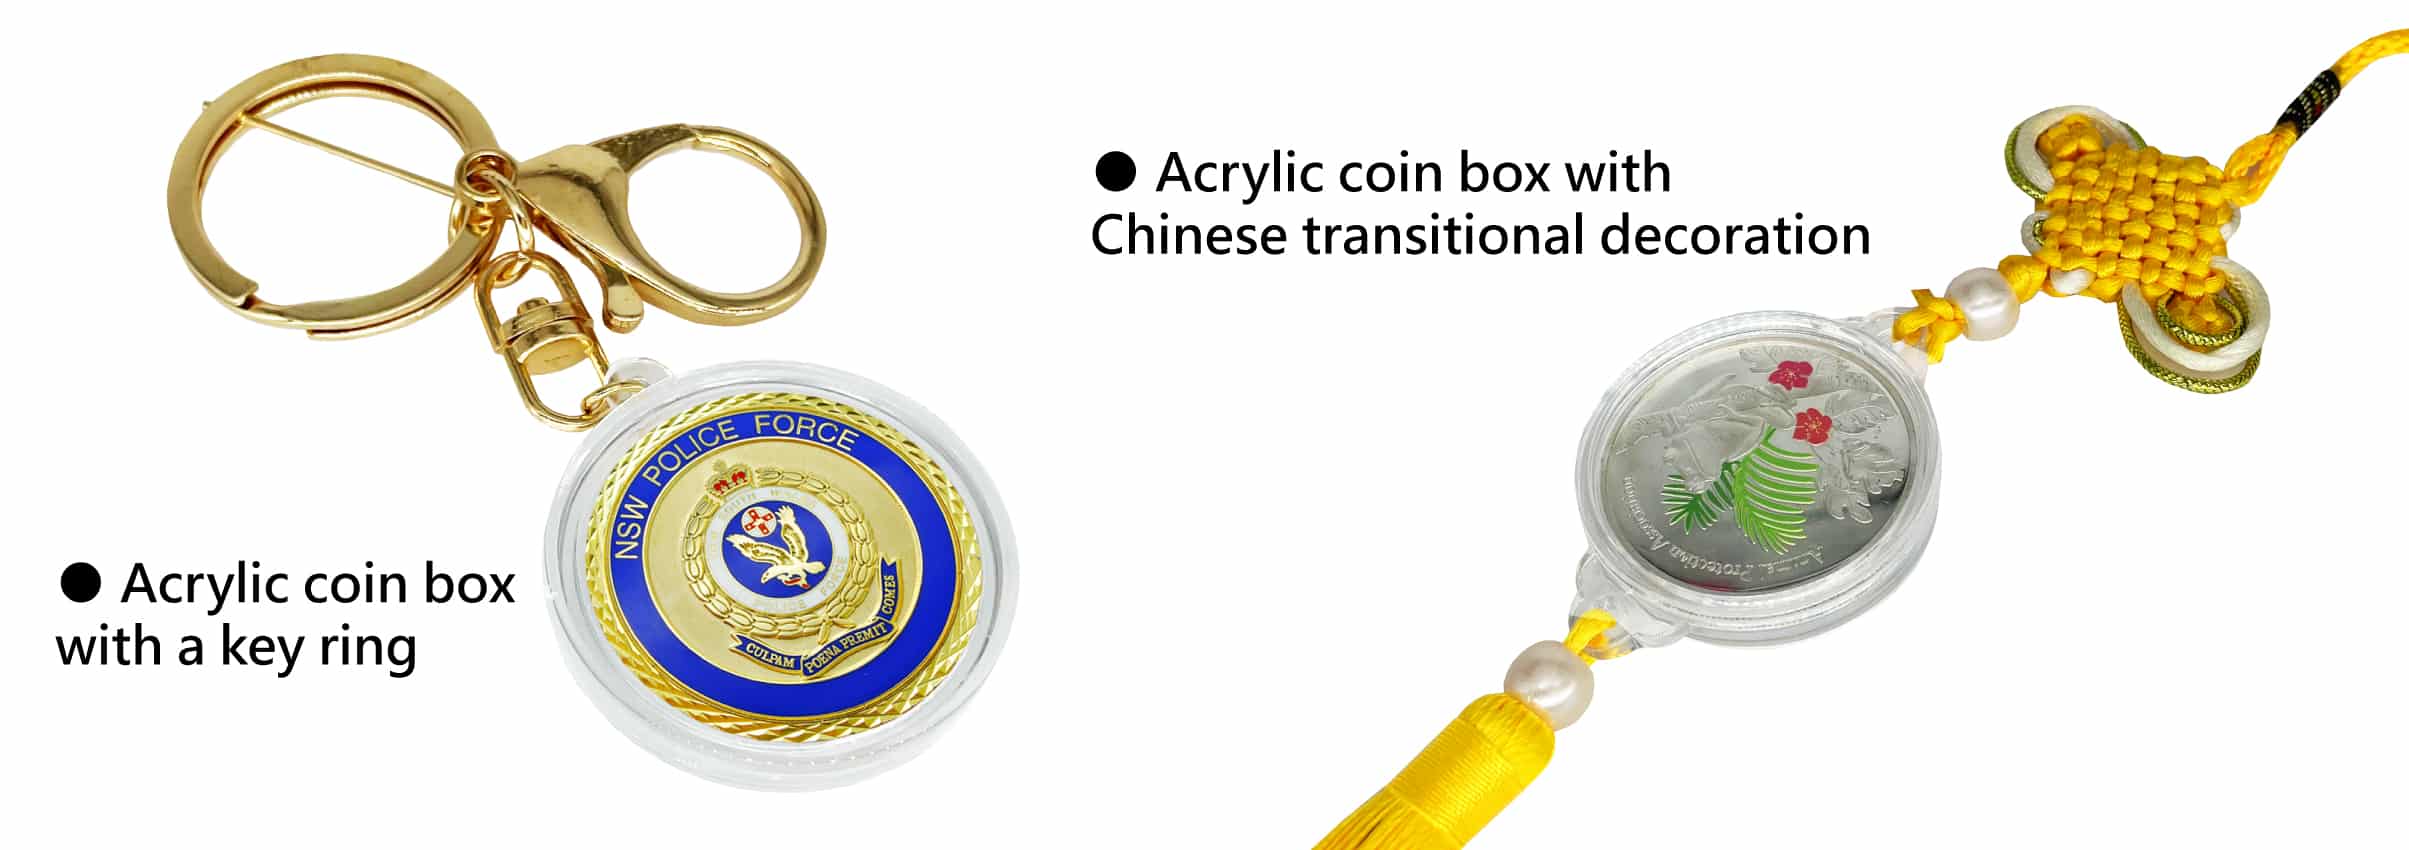 Order your own coin package